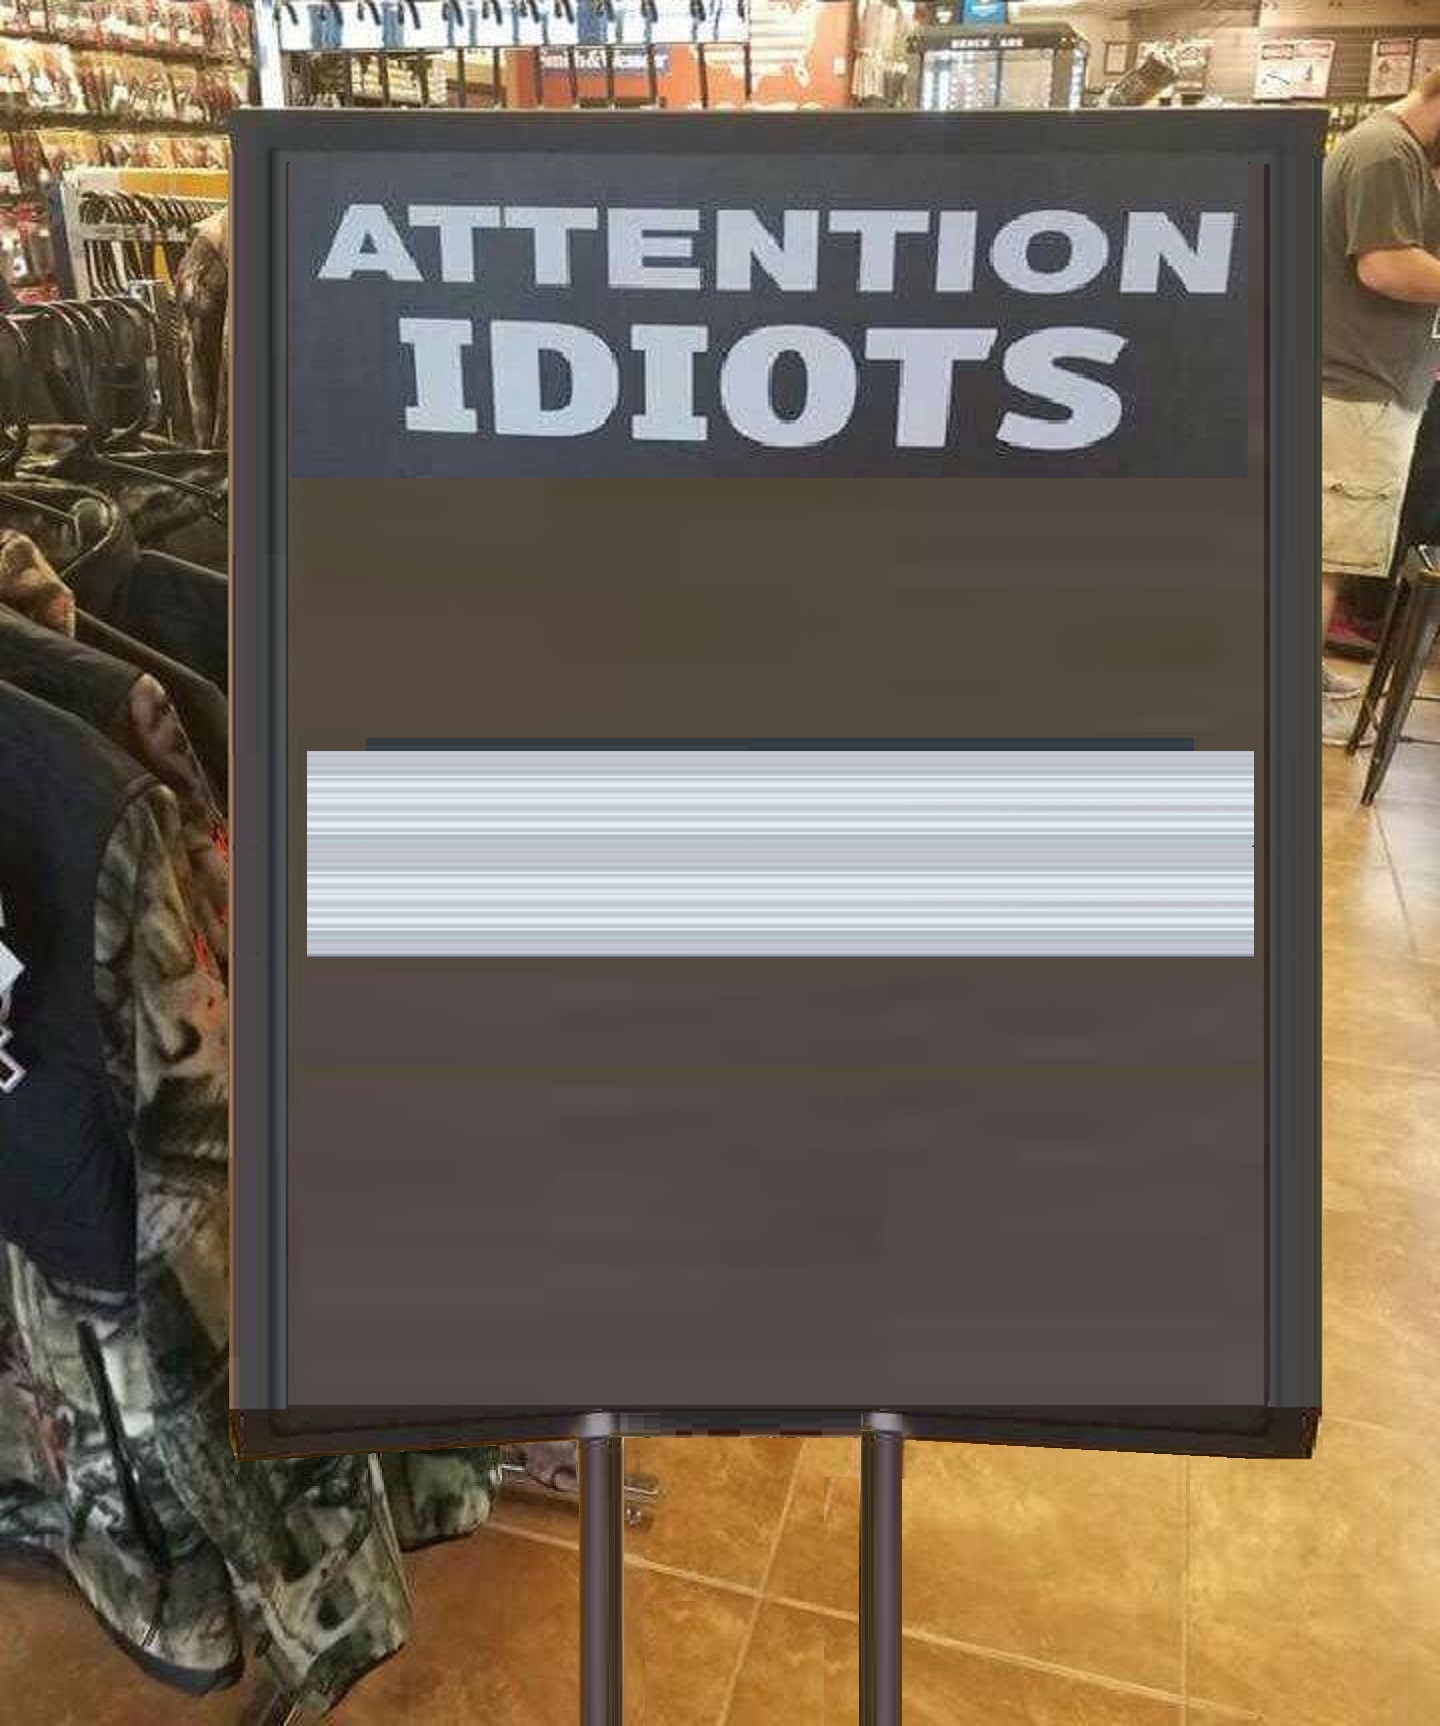 High Quality attention idiots Blank Meme Template